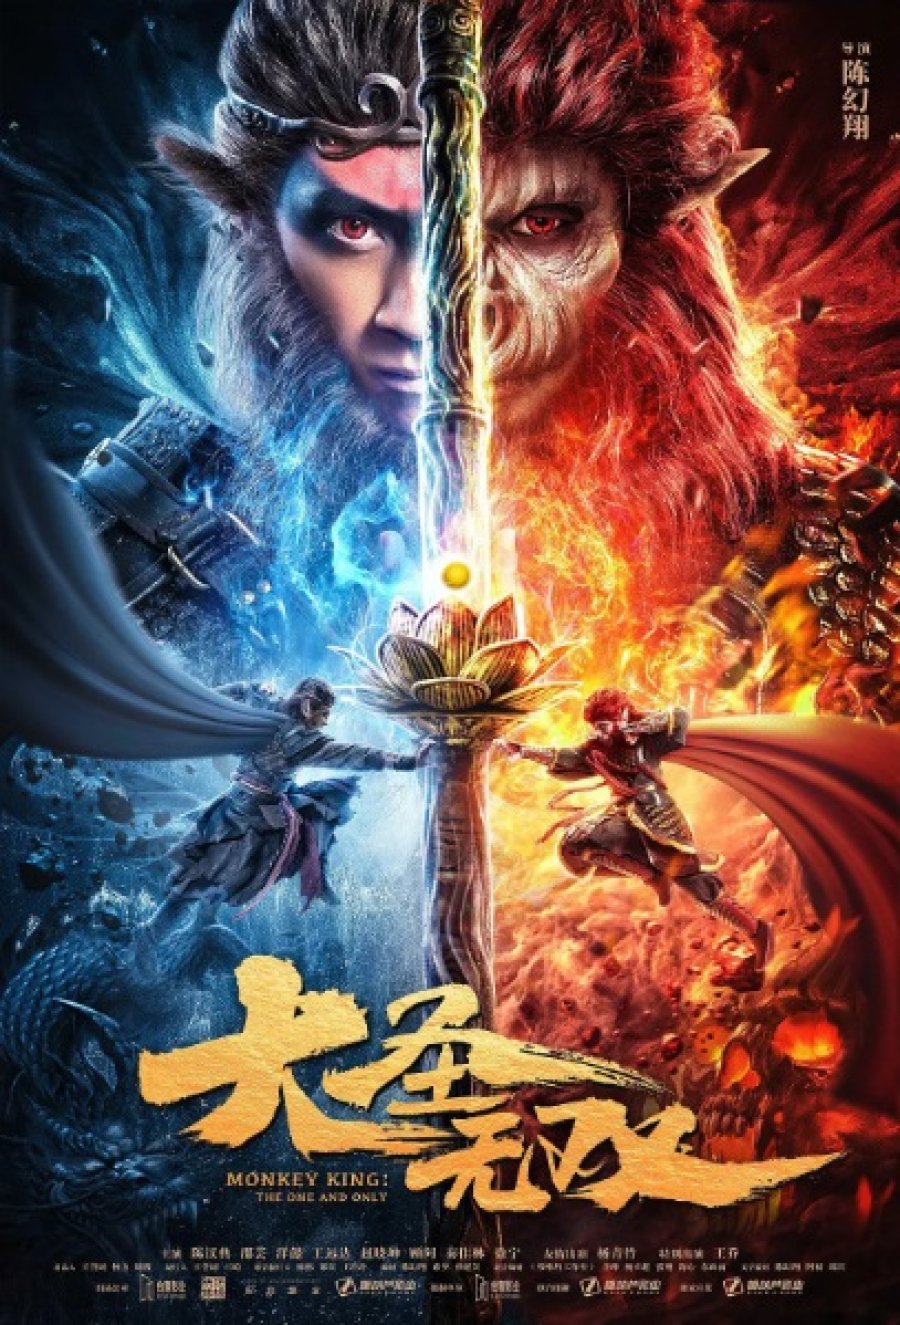 The Monkey King Review